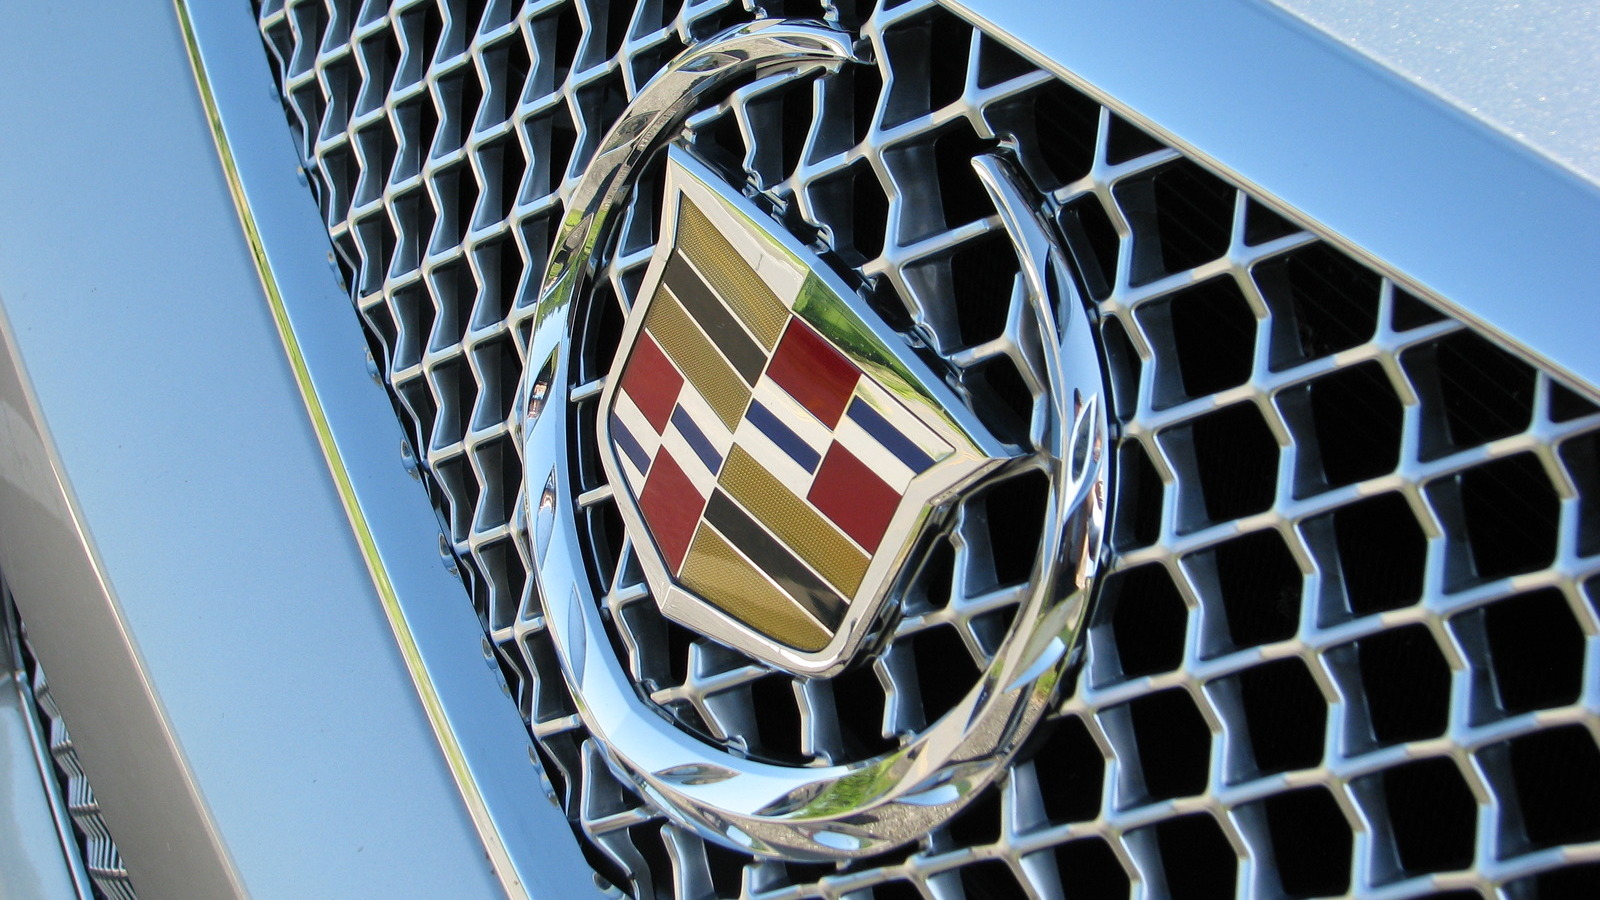 First Ride: 2011 Cadillac CTS-V Coupe